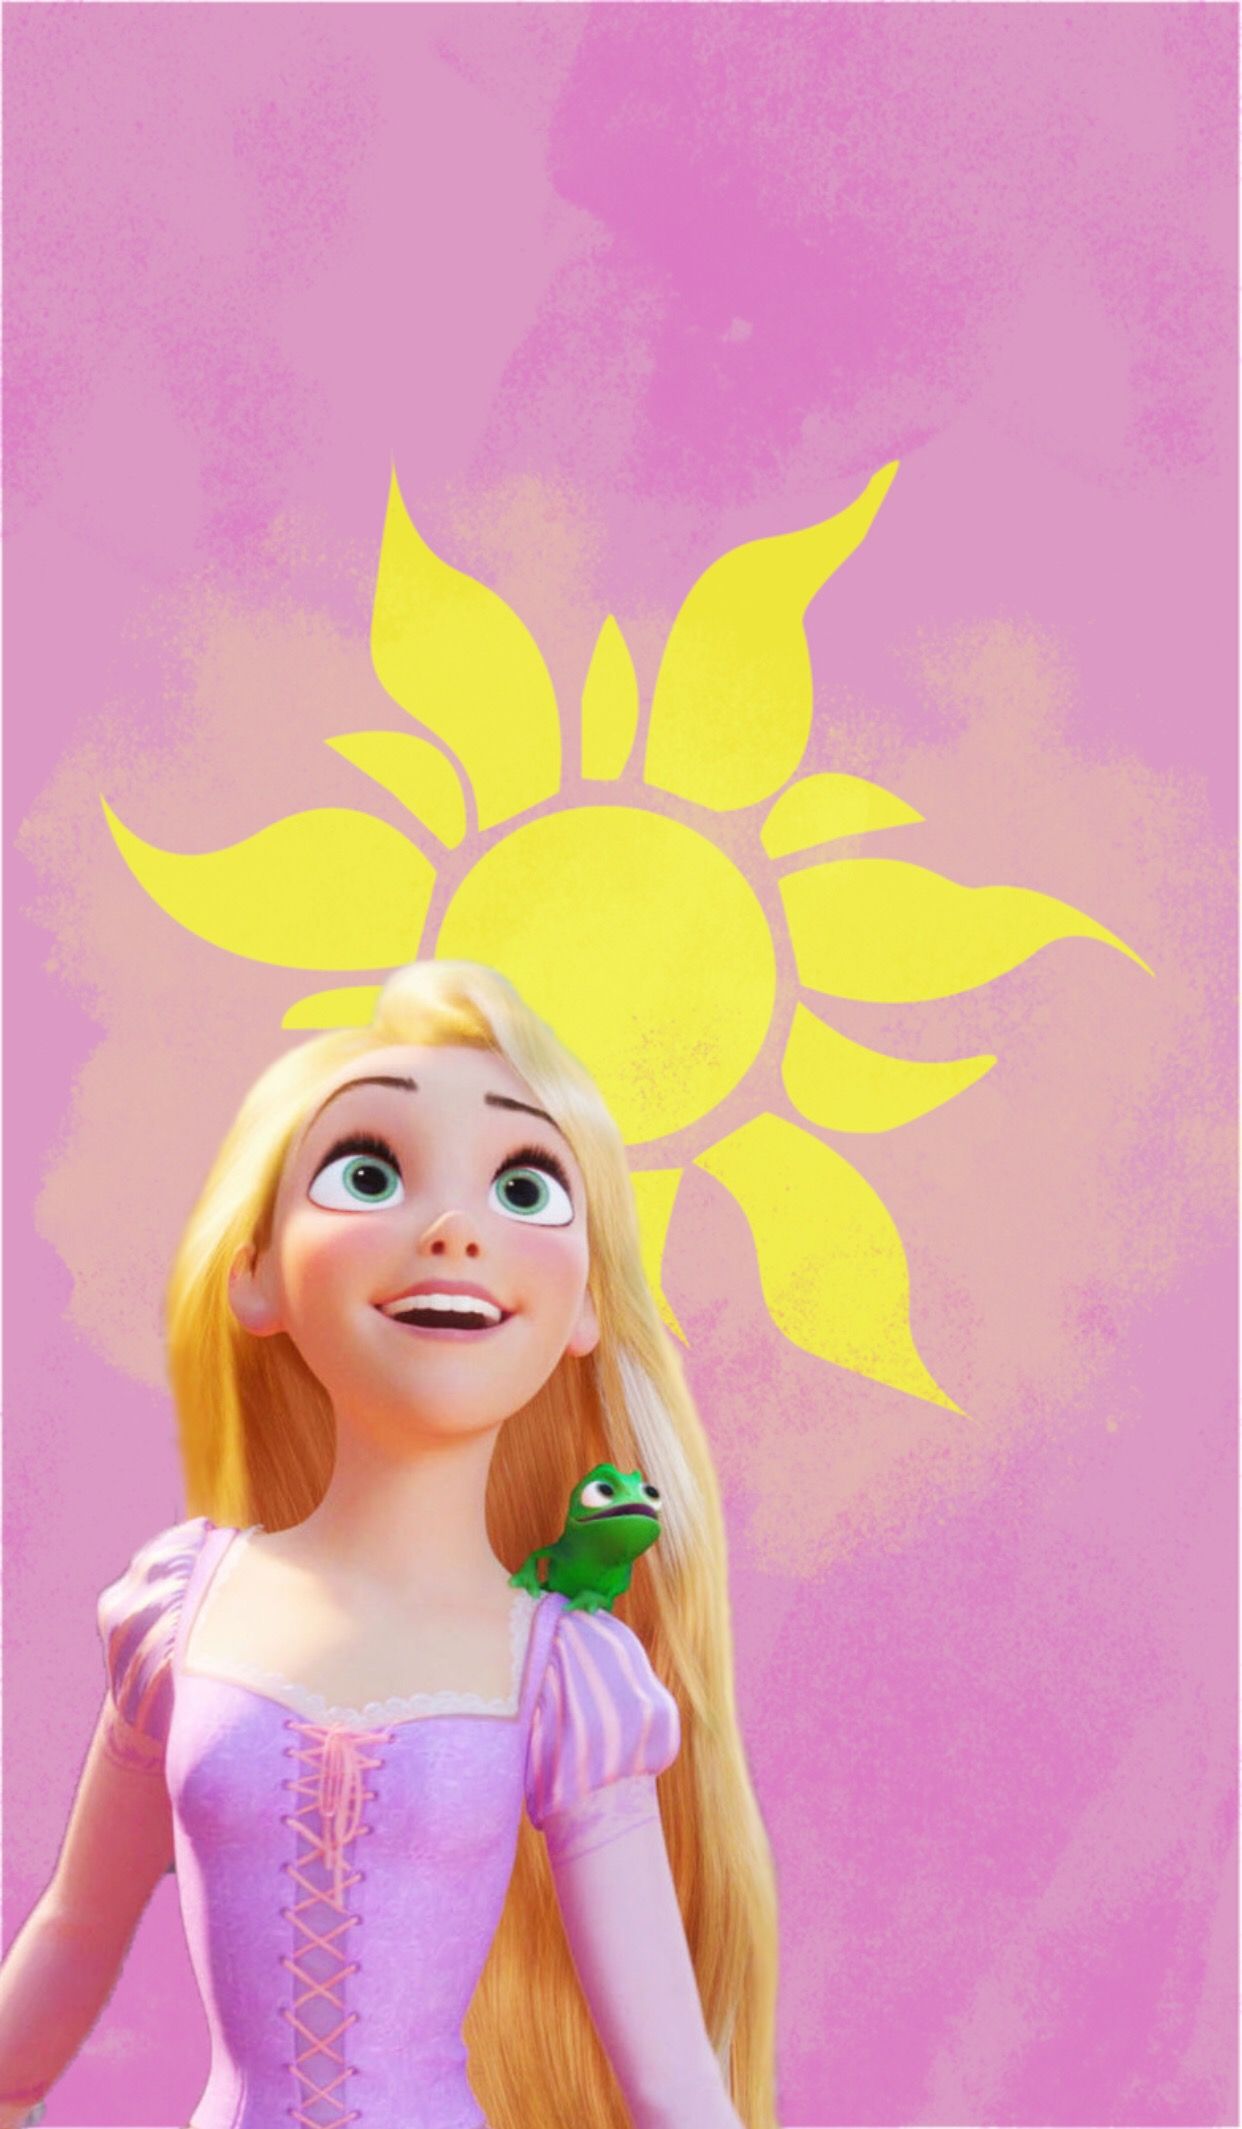 Rapunzel tangled wallpaper phone background for any device - Rapunzel